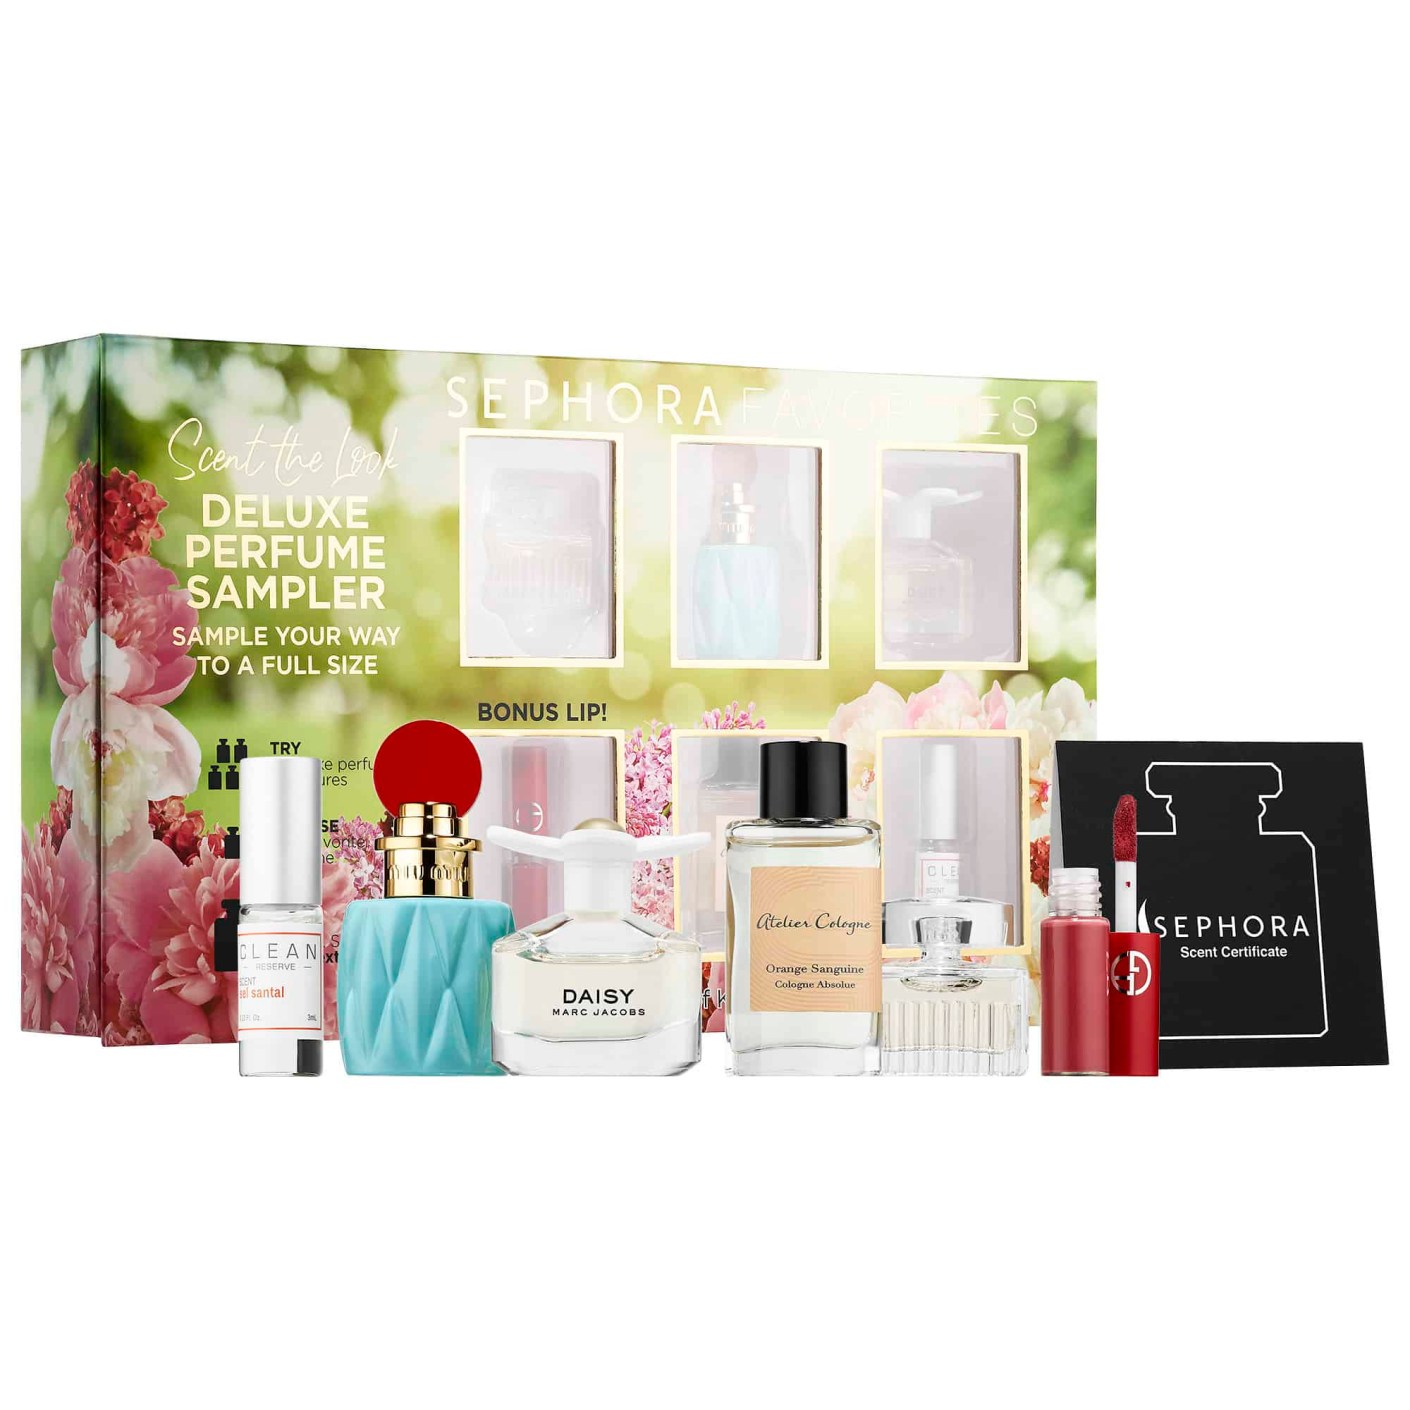 New Sephora Favorites Kits Available Now! - hello subscription